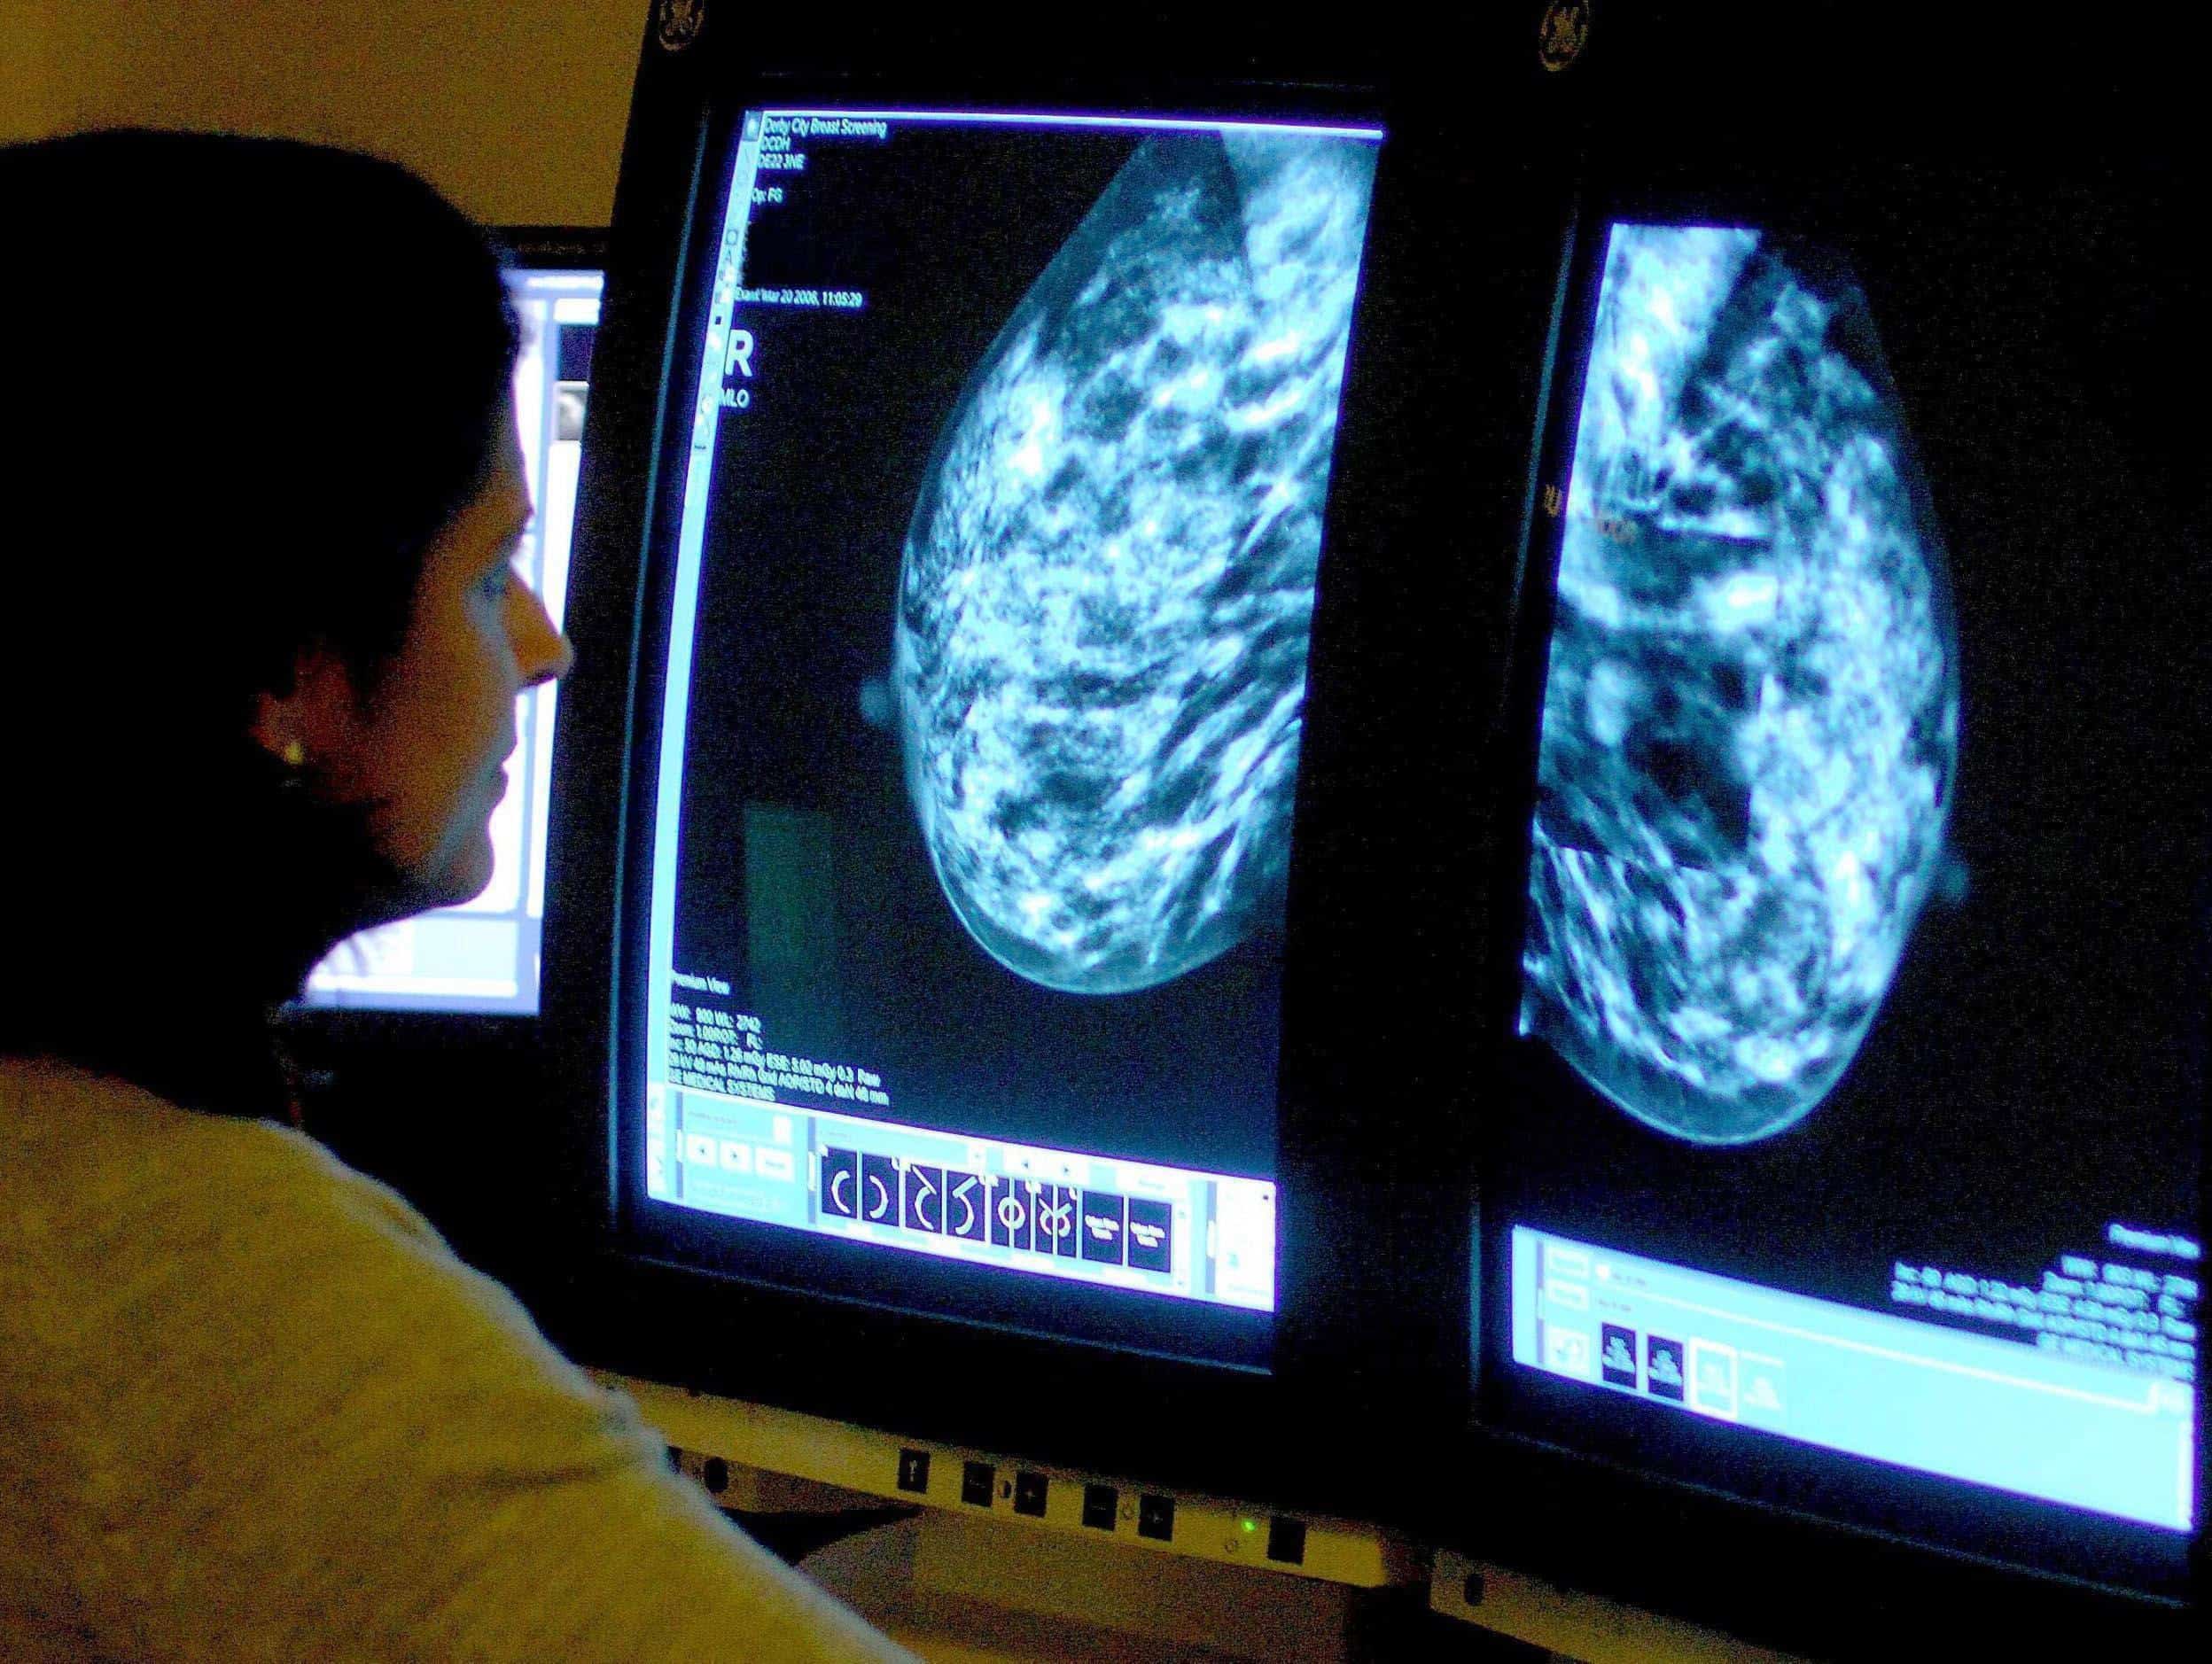 Cancer patients ‘left in the dark’ amid staff shortages